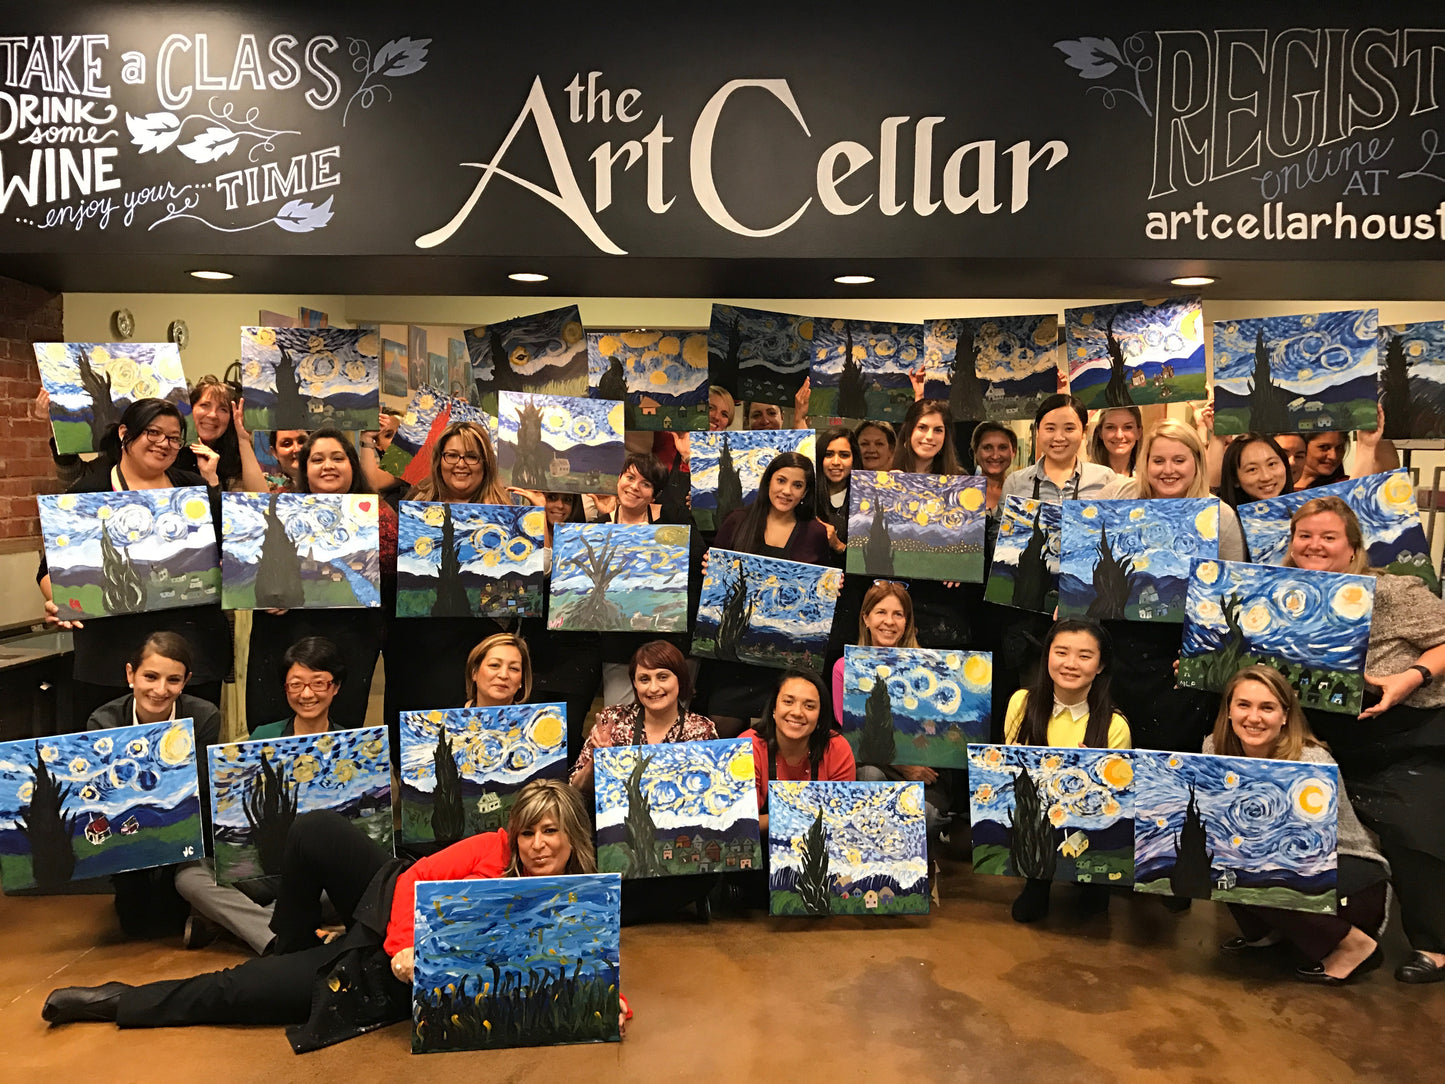 Thu, Oct 19th, 1-4P “Fall Stream" Private Houston Corporate Paint Party